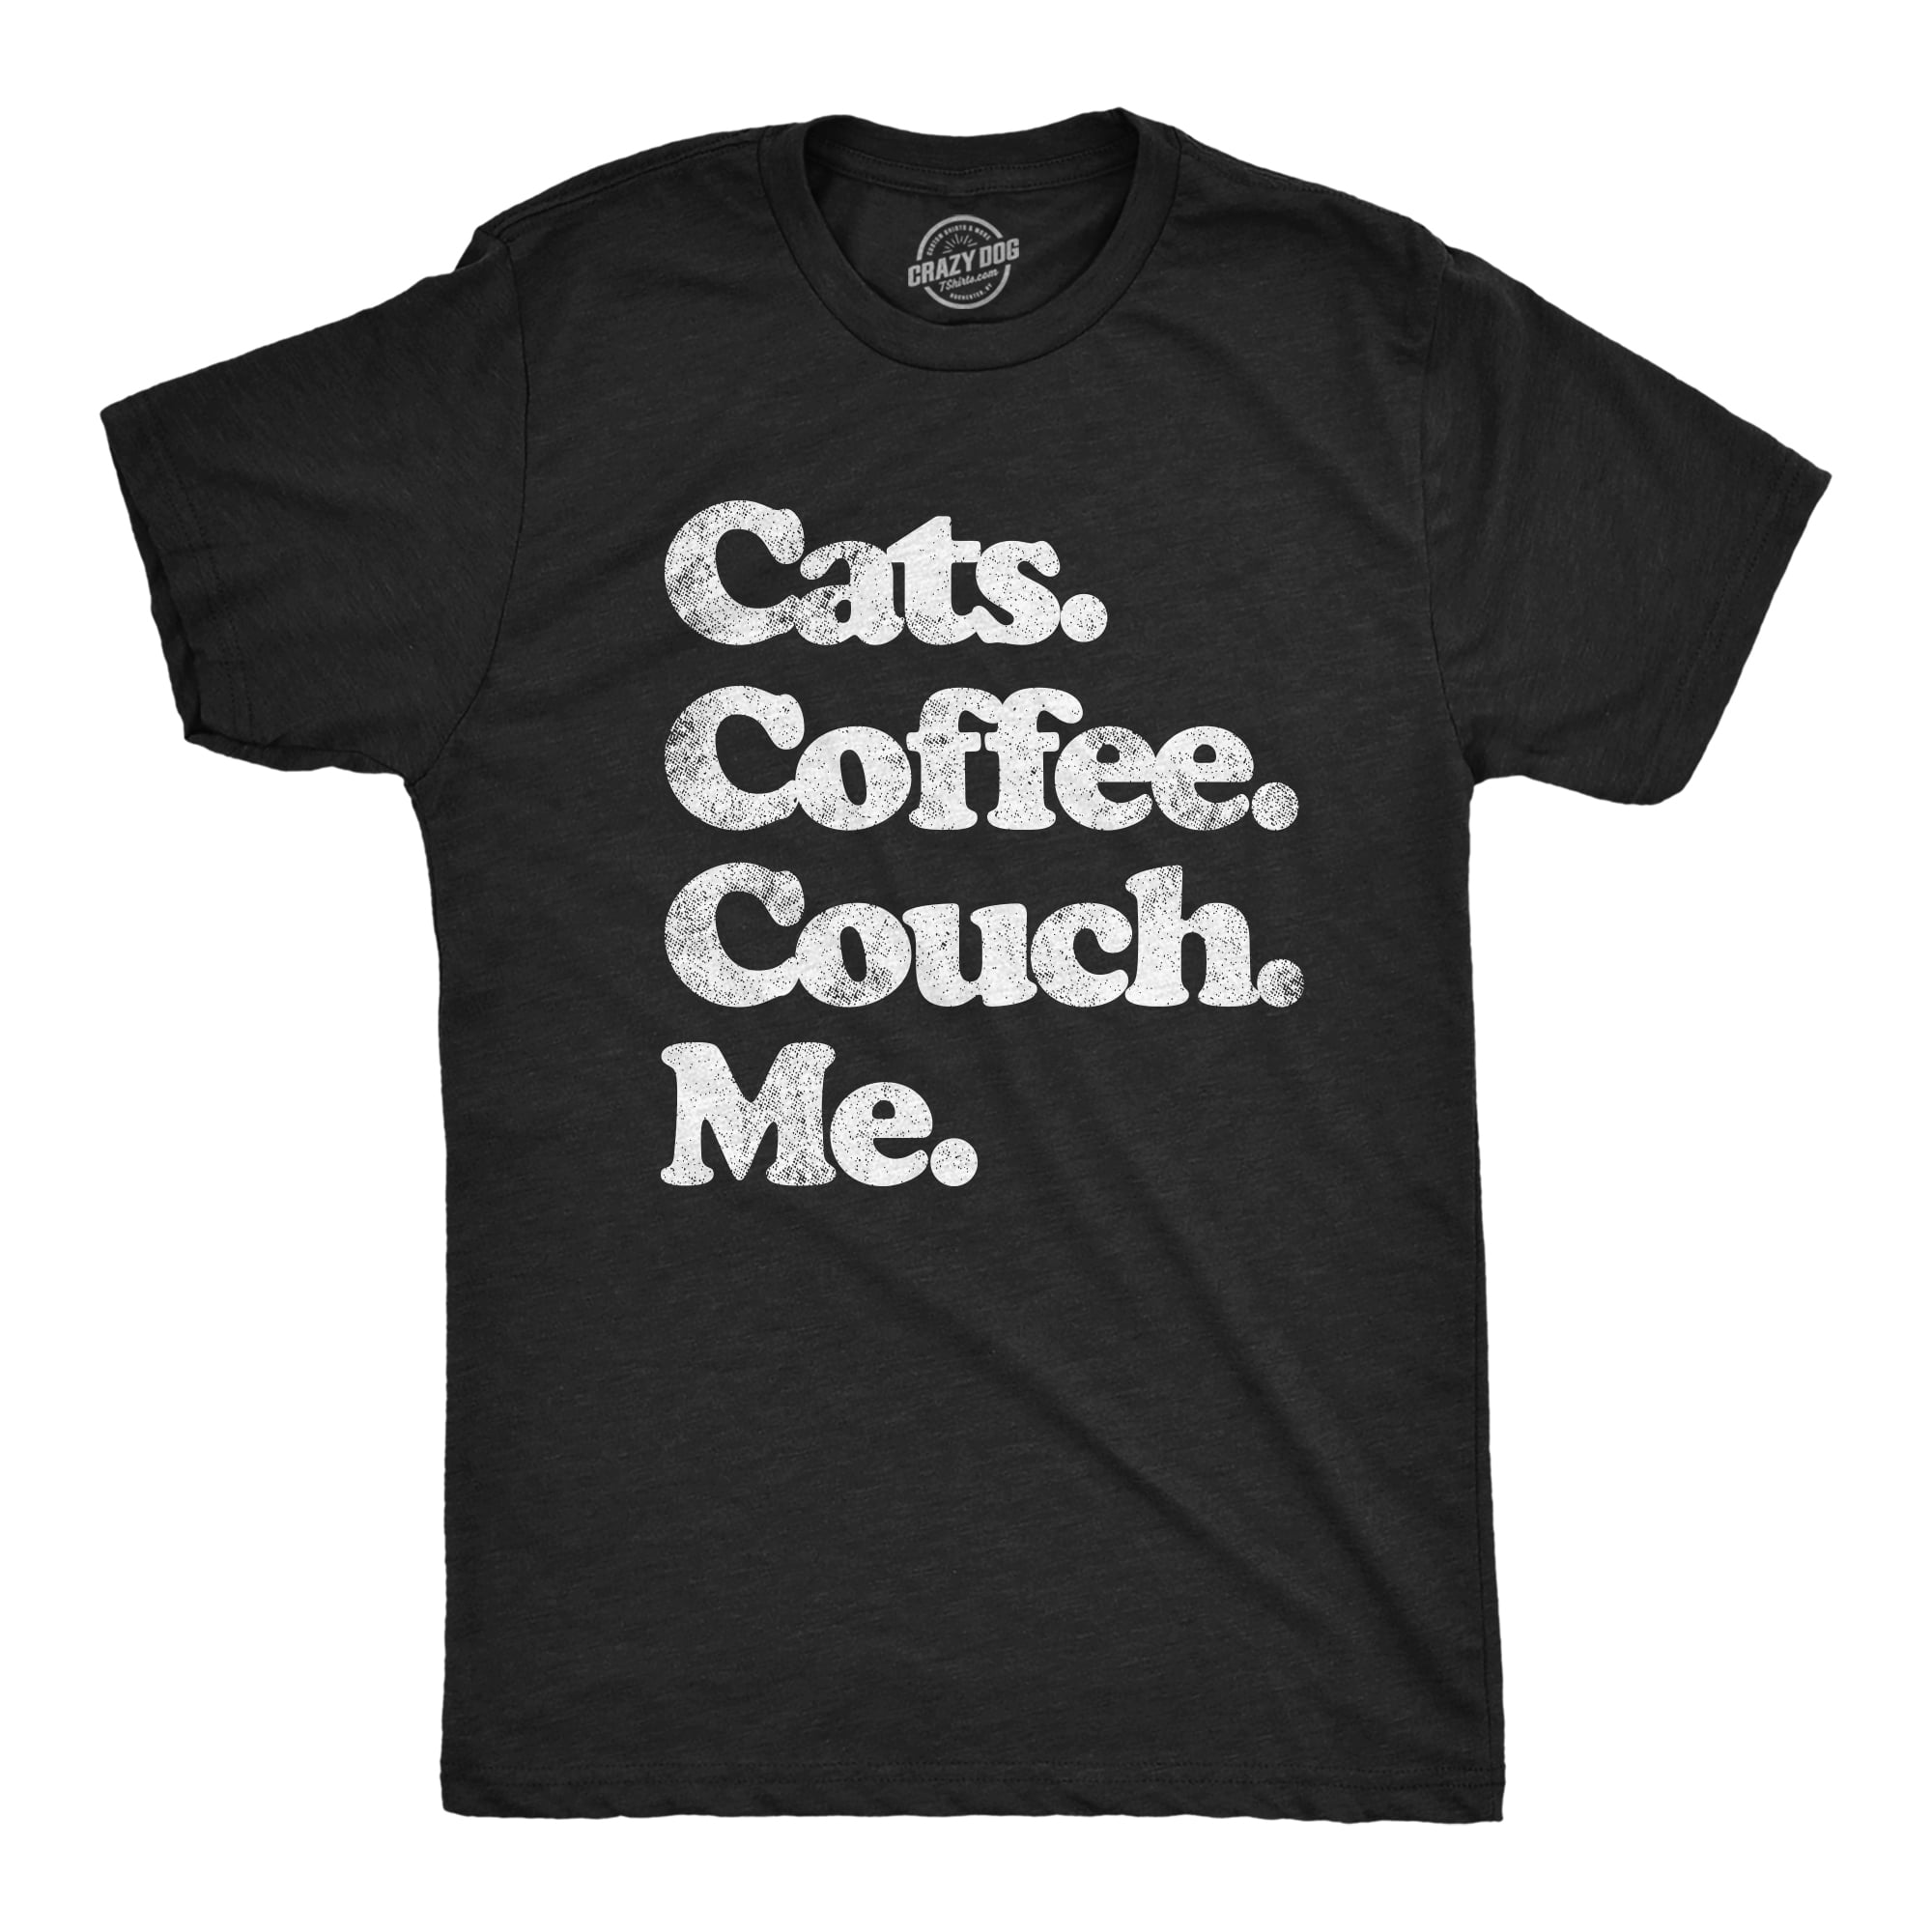 Mens Cats Coffee Couch Me T Shirt Funny Saying Cool Graphic Tee Fun Top ...